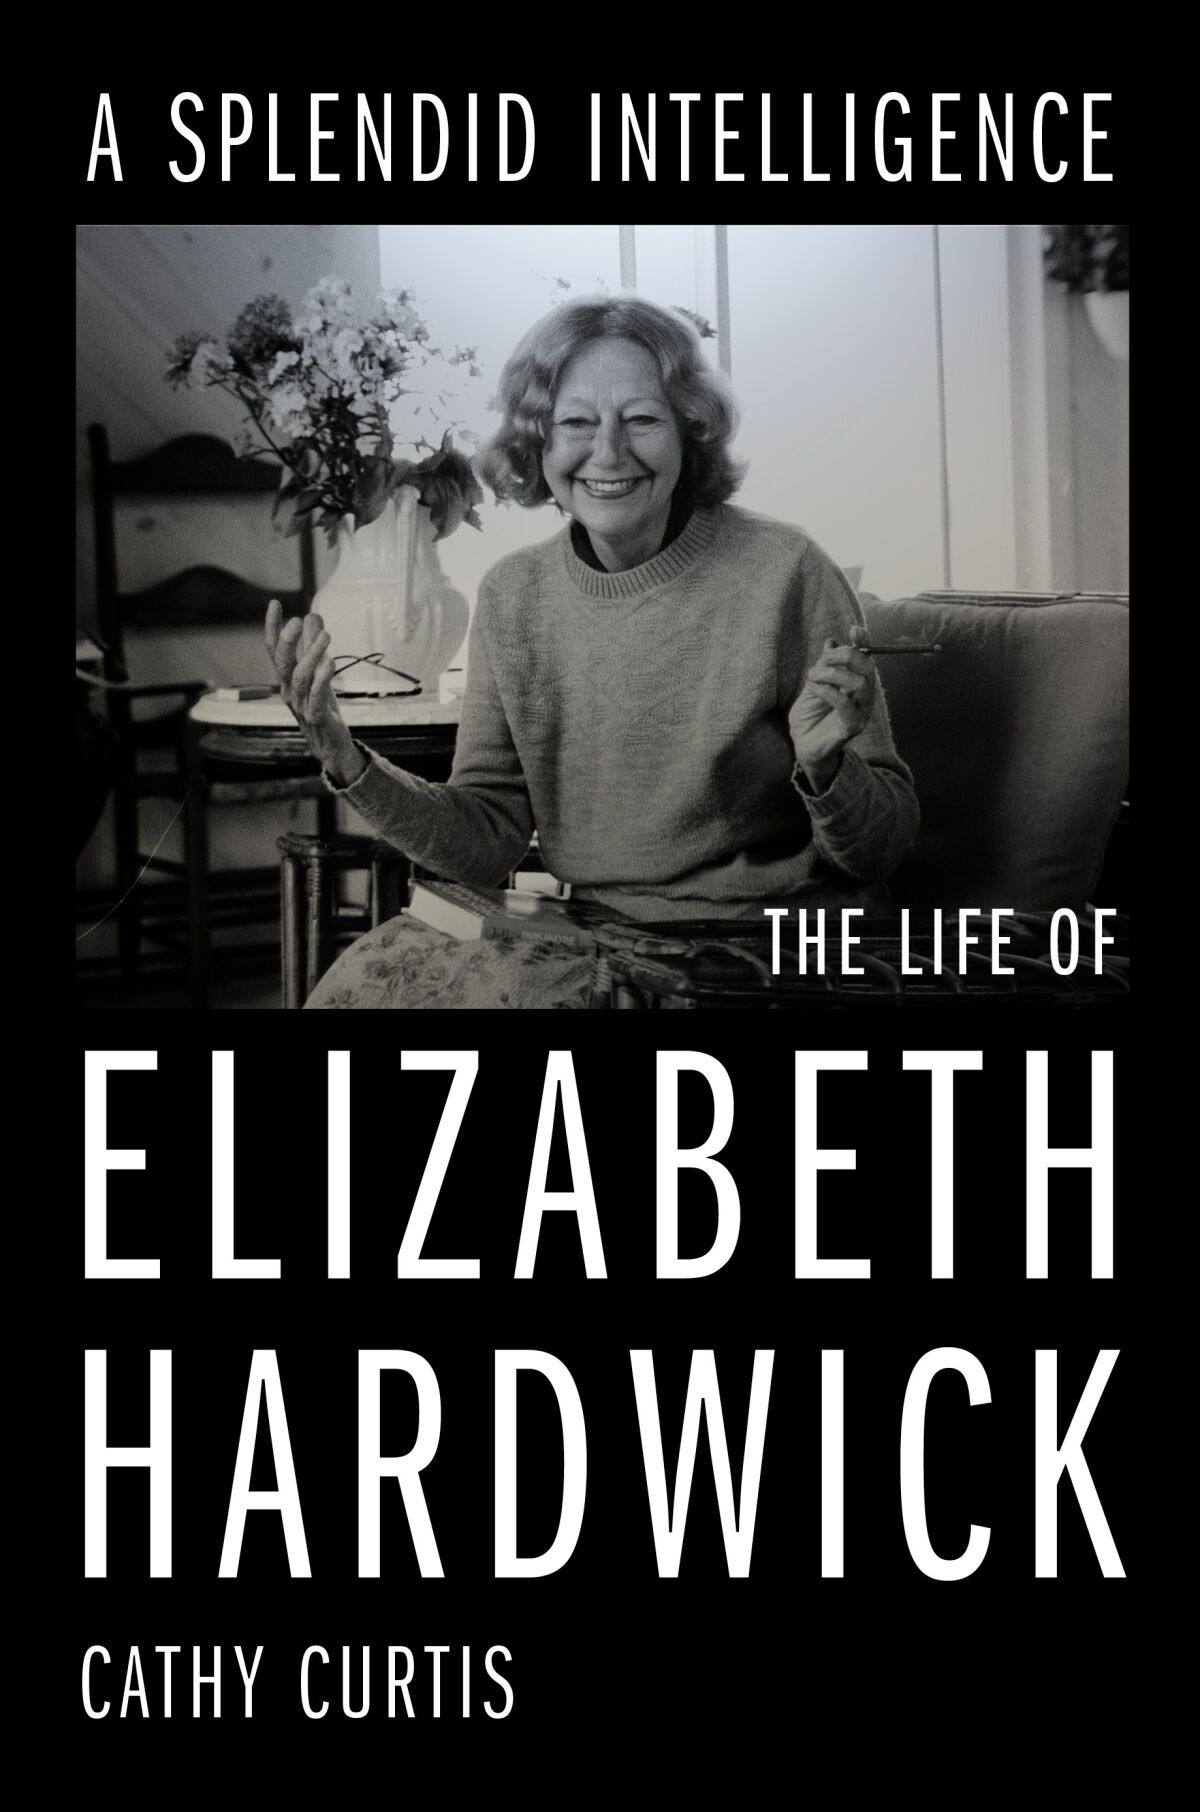 A black-and-white photo of Elizabeth Hardwick on the cover of "A Splendid Intelligence," by Cathy Curtis.